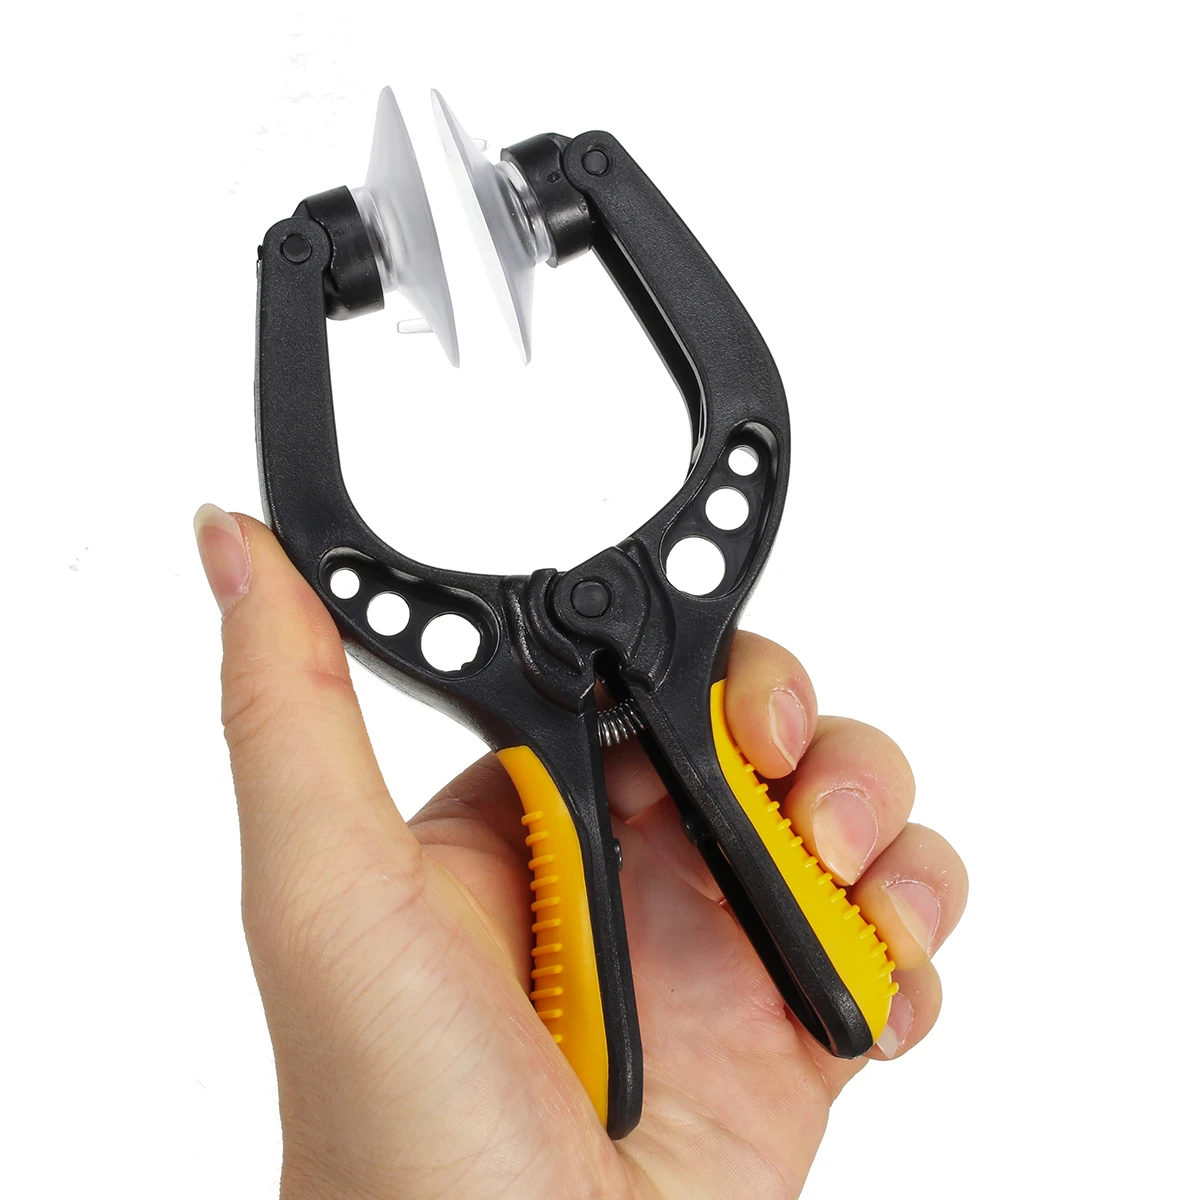 LCD Screen Opening Pliers Repair Tool with Super Strong Suction Cup Platform for Cell Phone